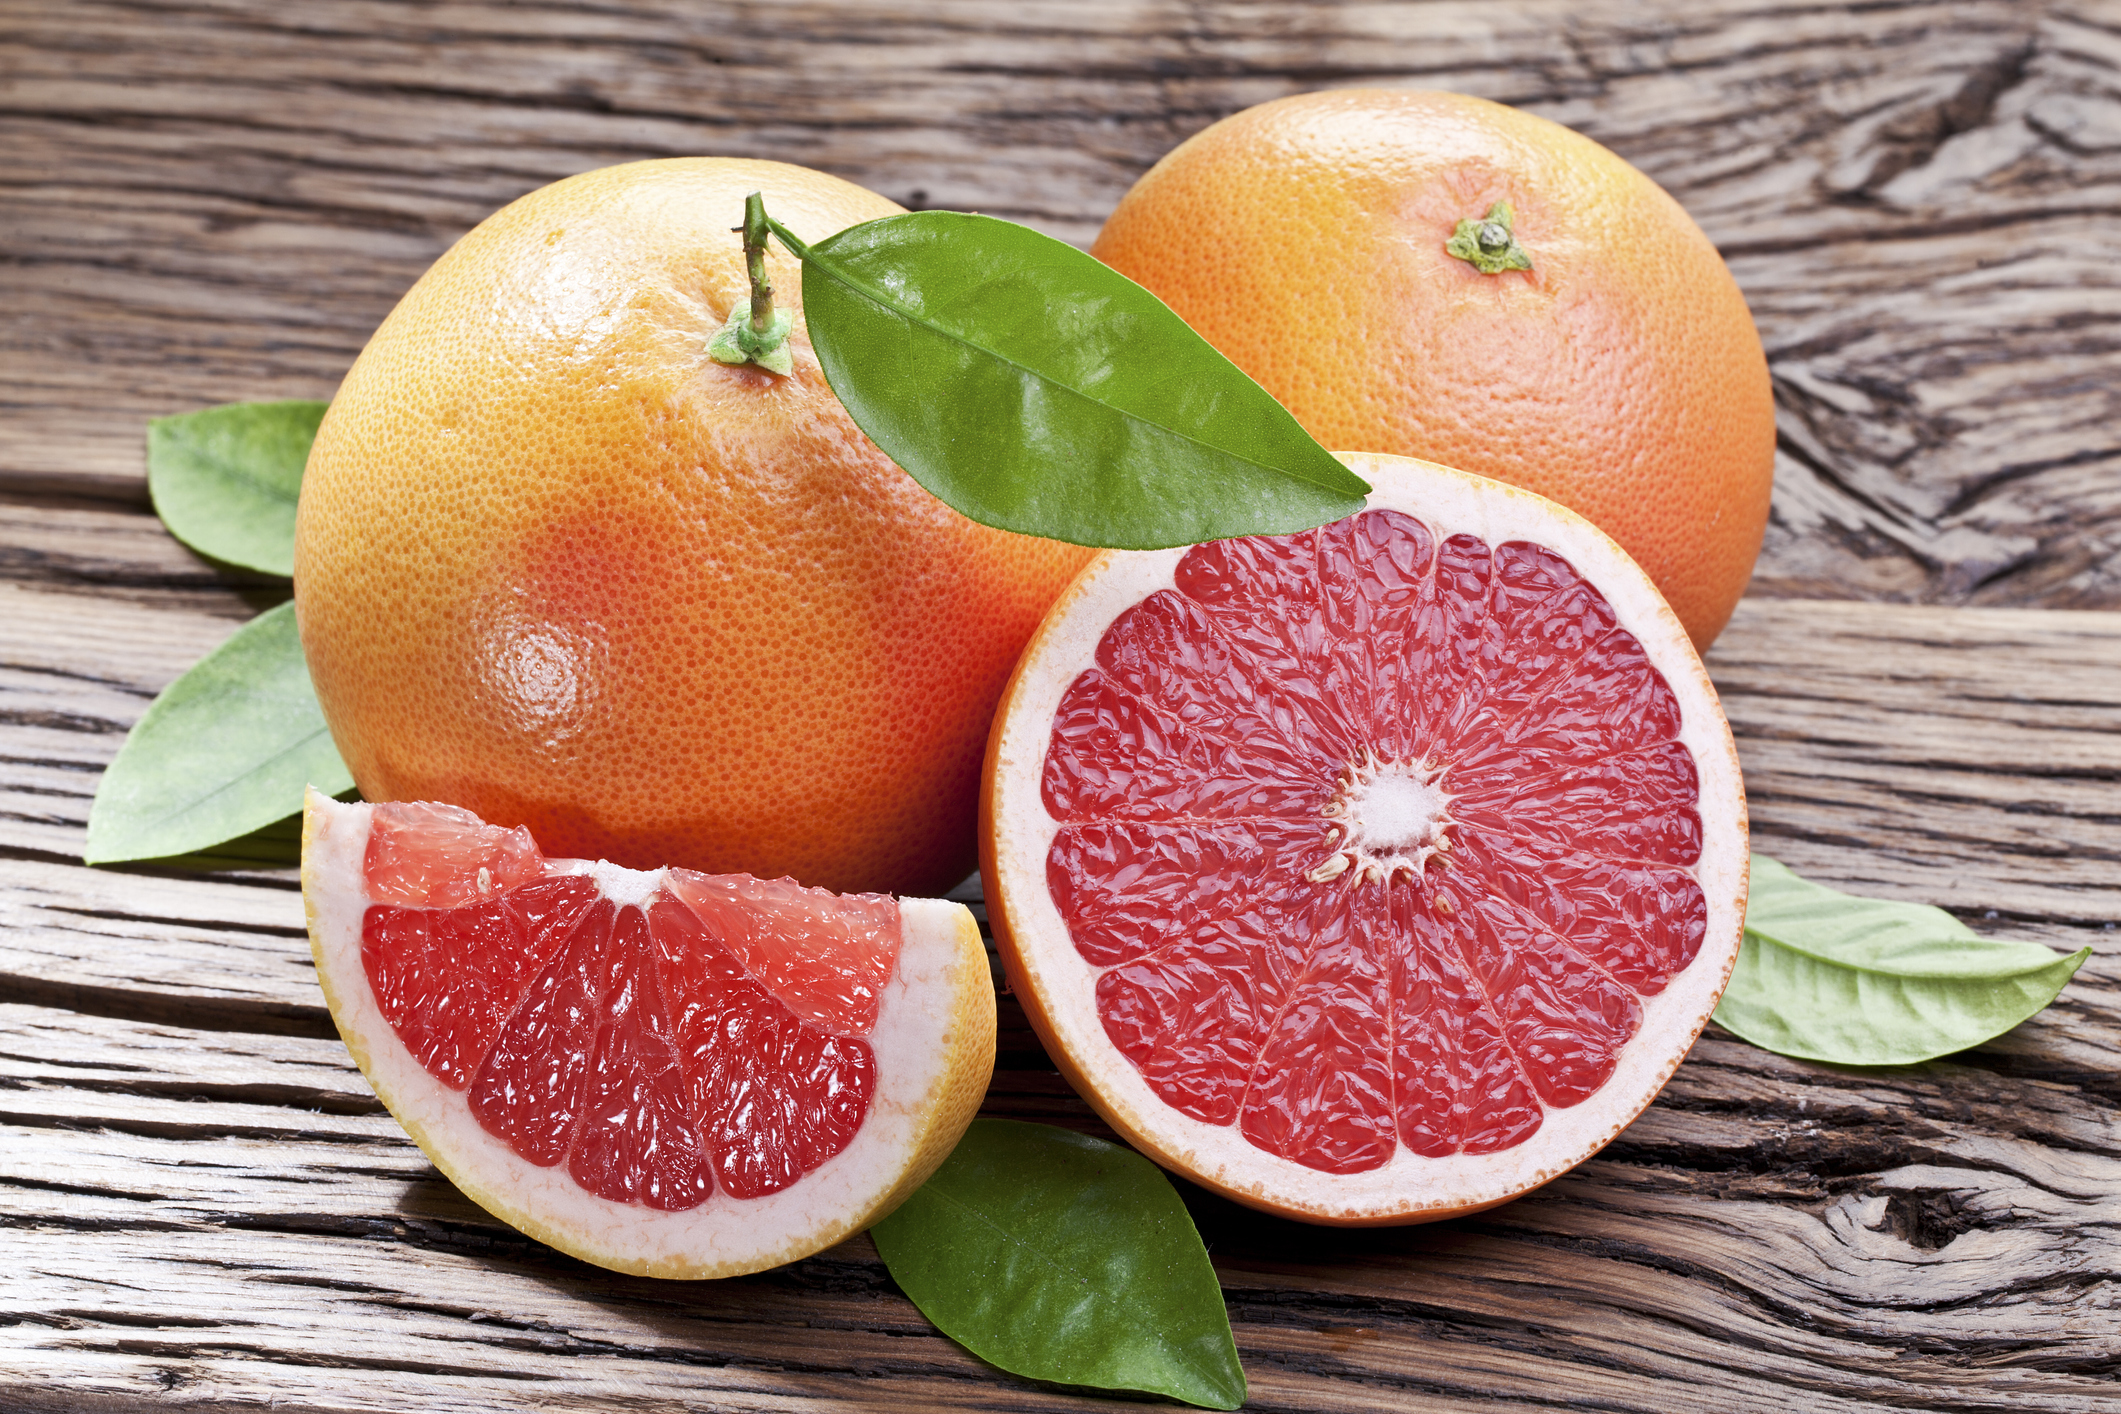 Grapefruits Are Healthy. but Sho...